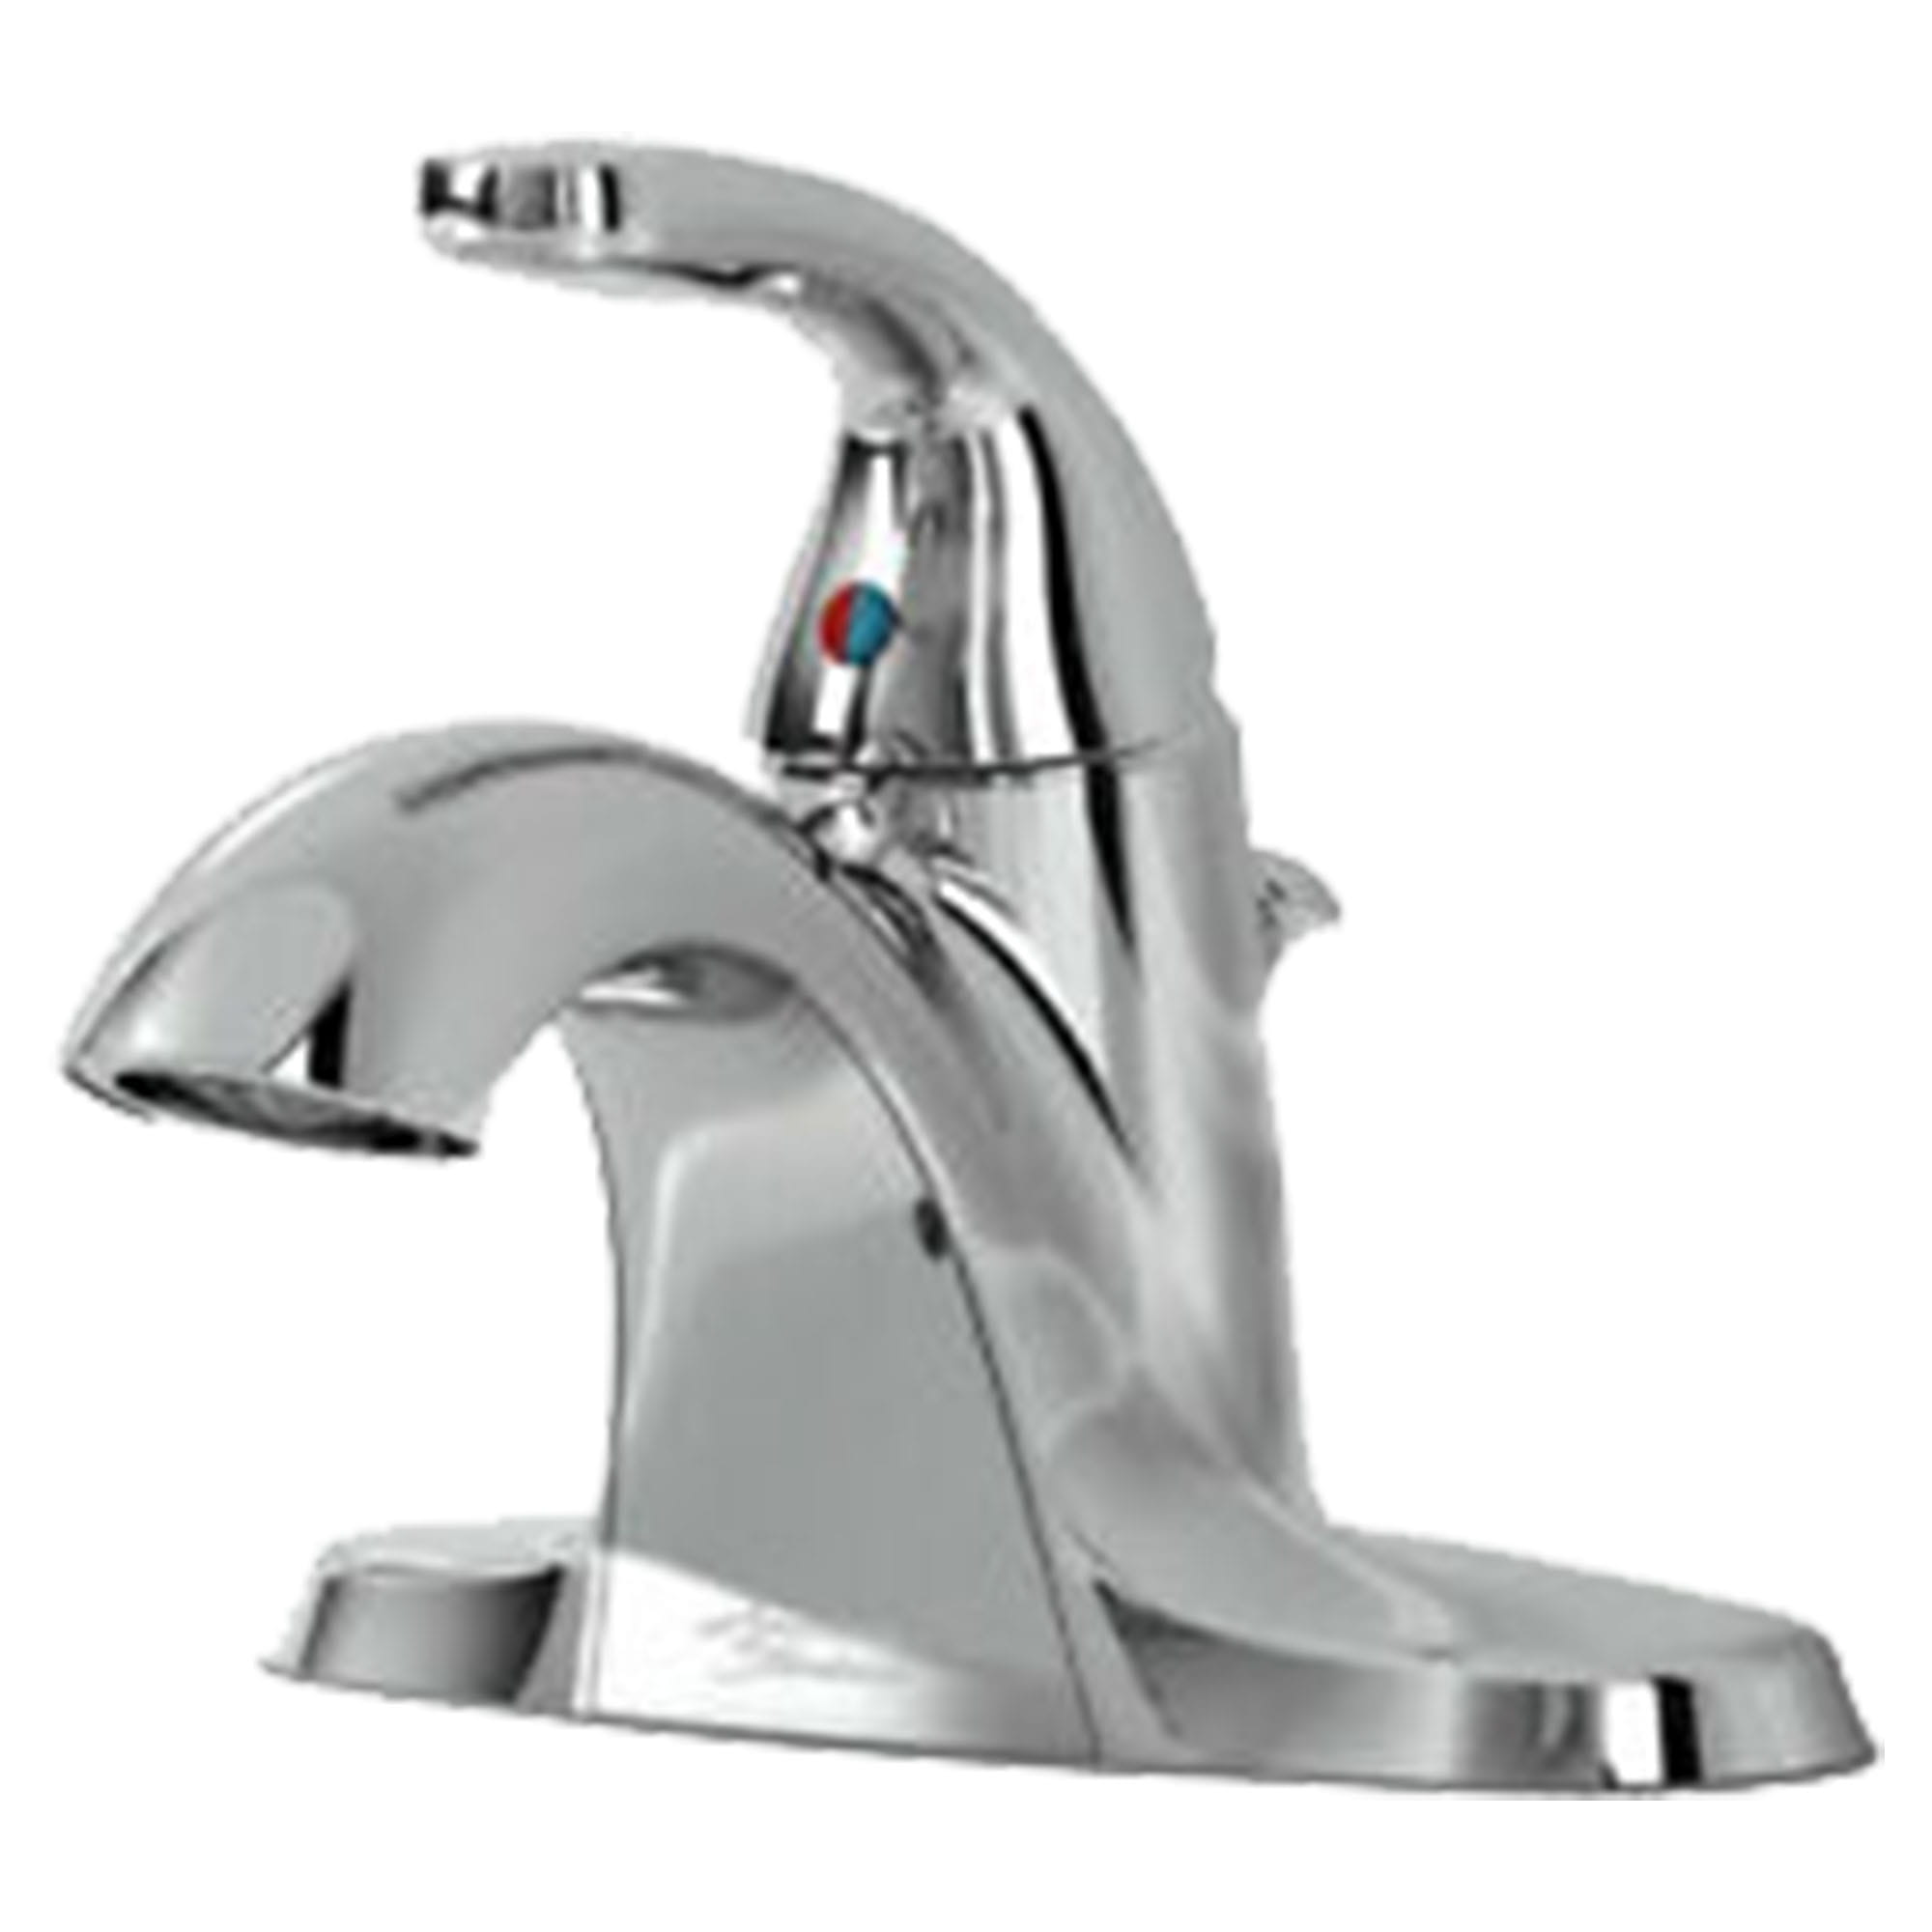 Cadet 20 4 In Centerset Single Handle Bathroom Faucet 12 GPM with Plastic Drain CHROME